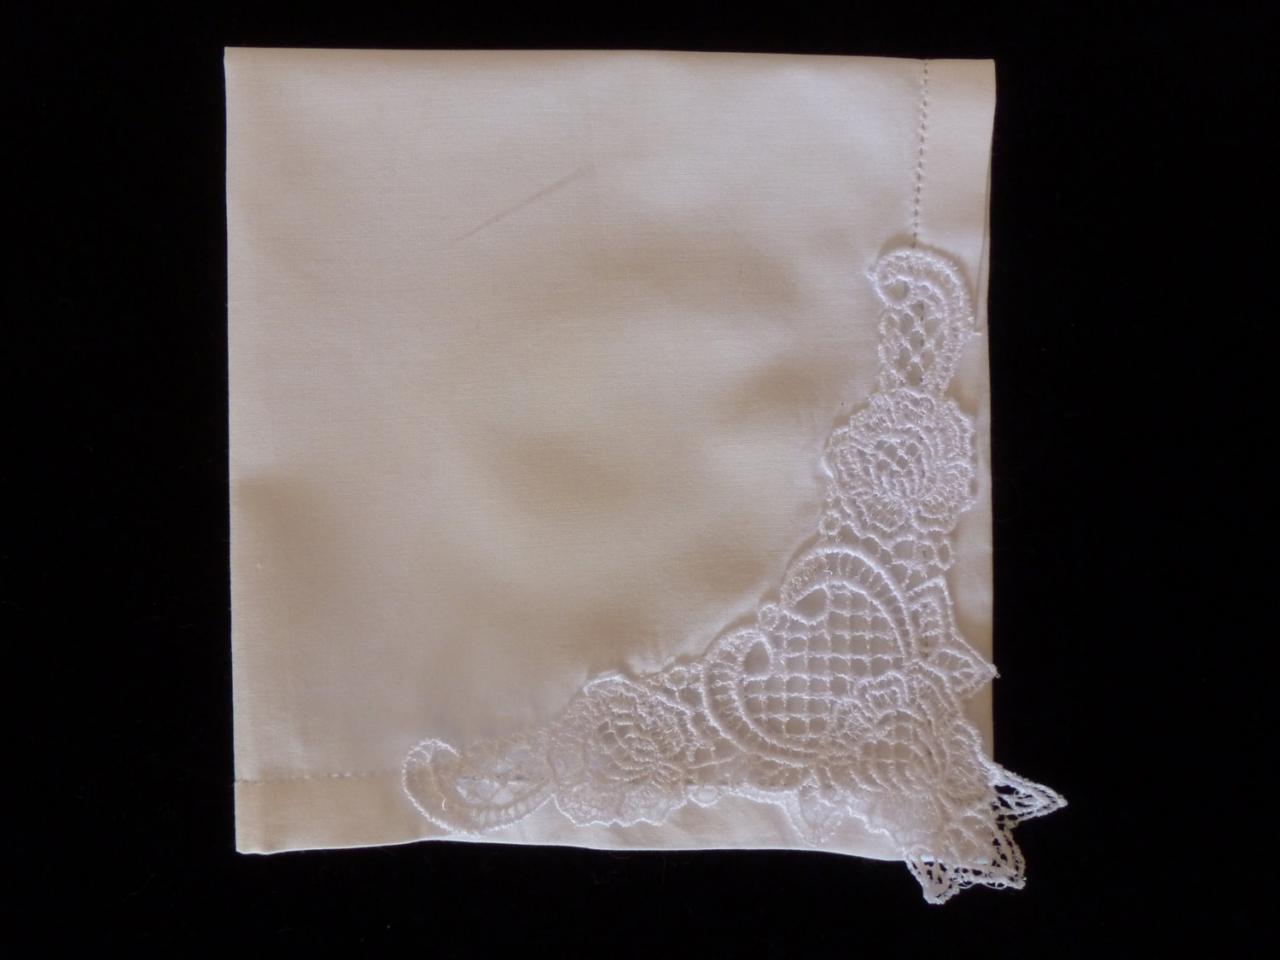 Sweetness Created Lace Hemstitched Cotton Wedding Handkerchief - Initial Impressions Exclusive - Embroidered Personalized